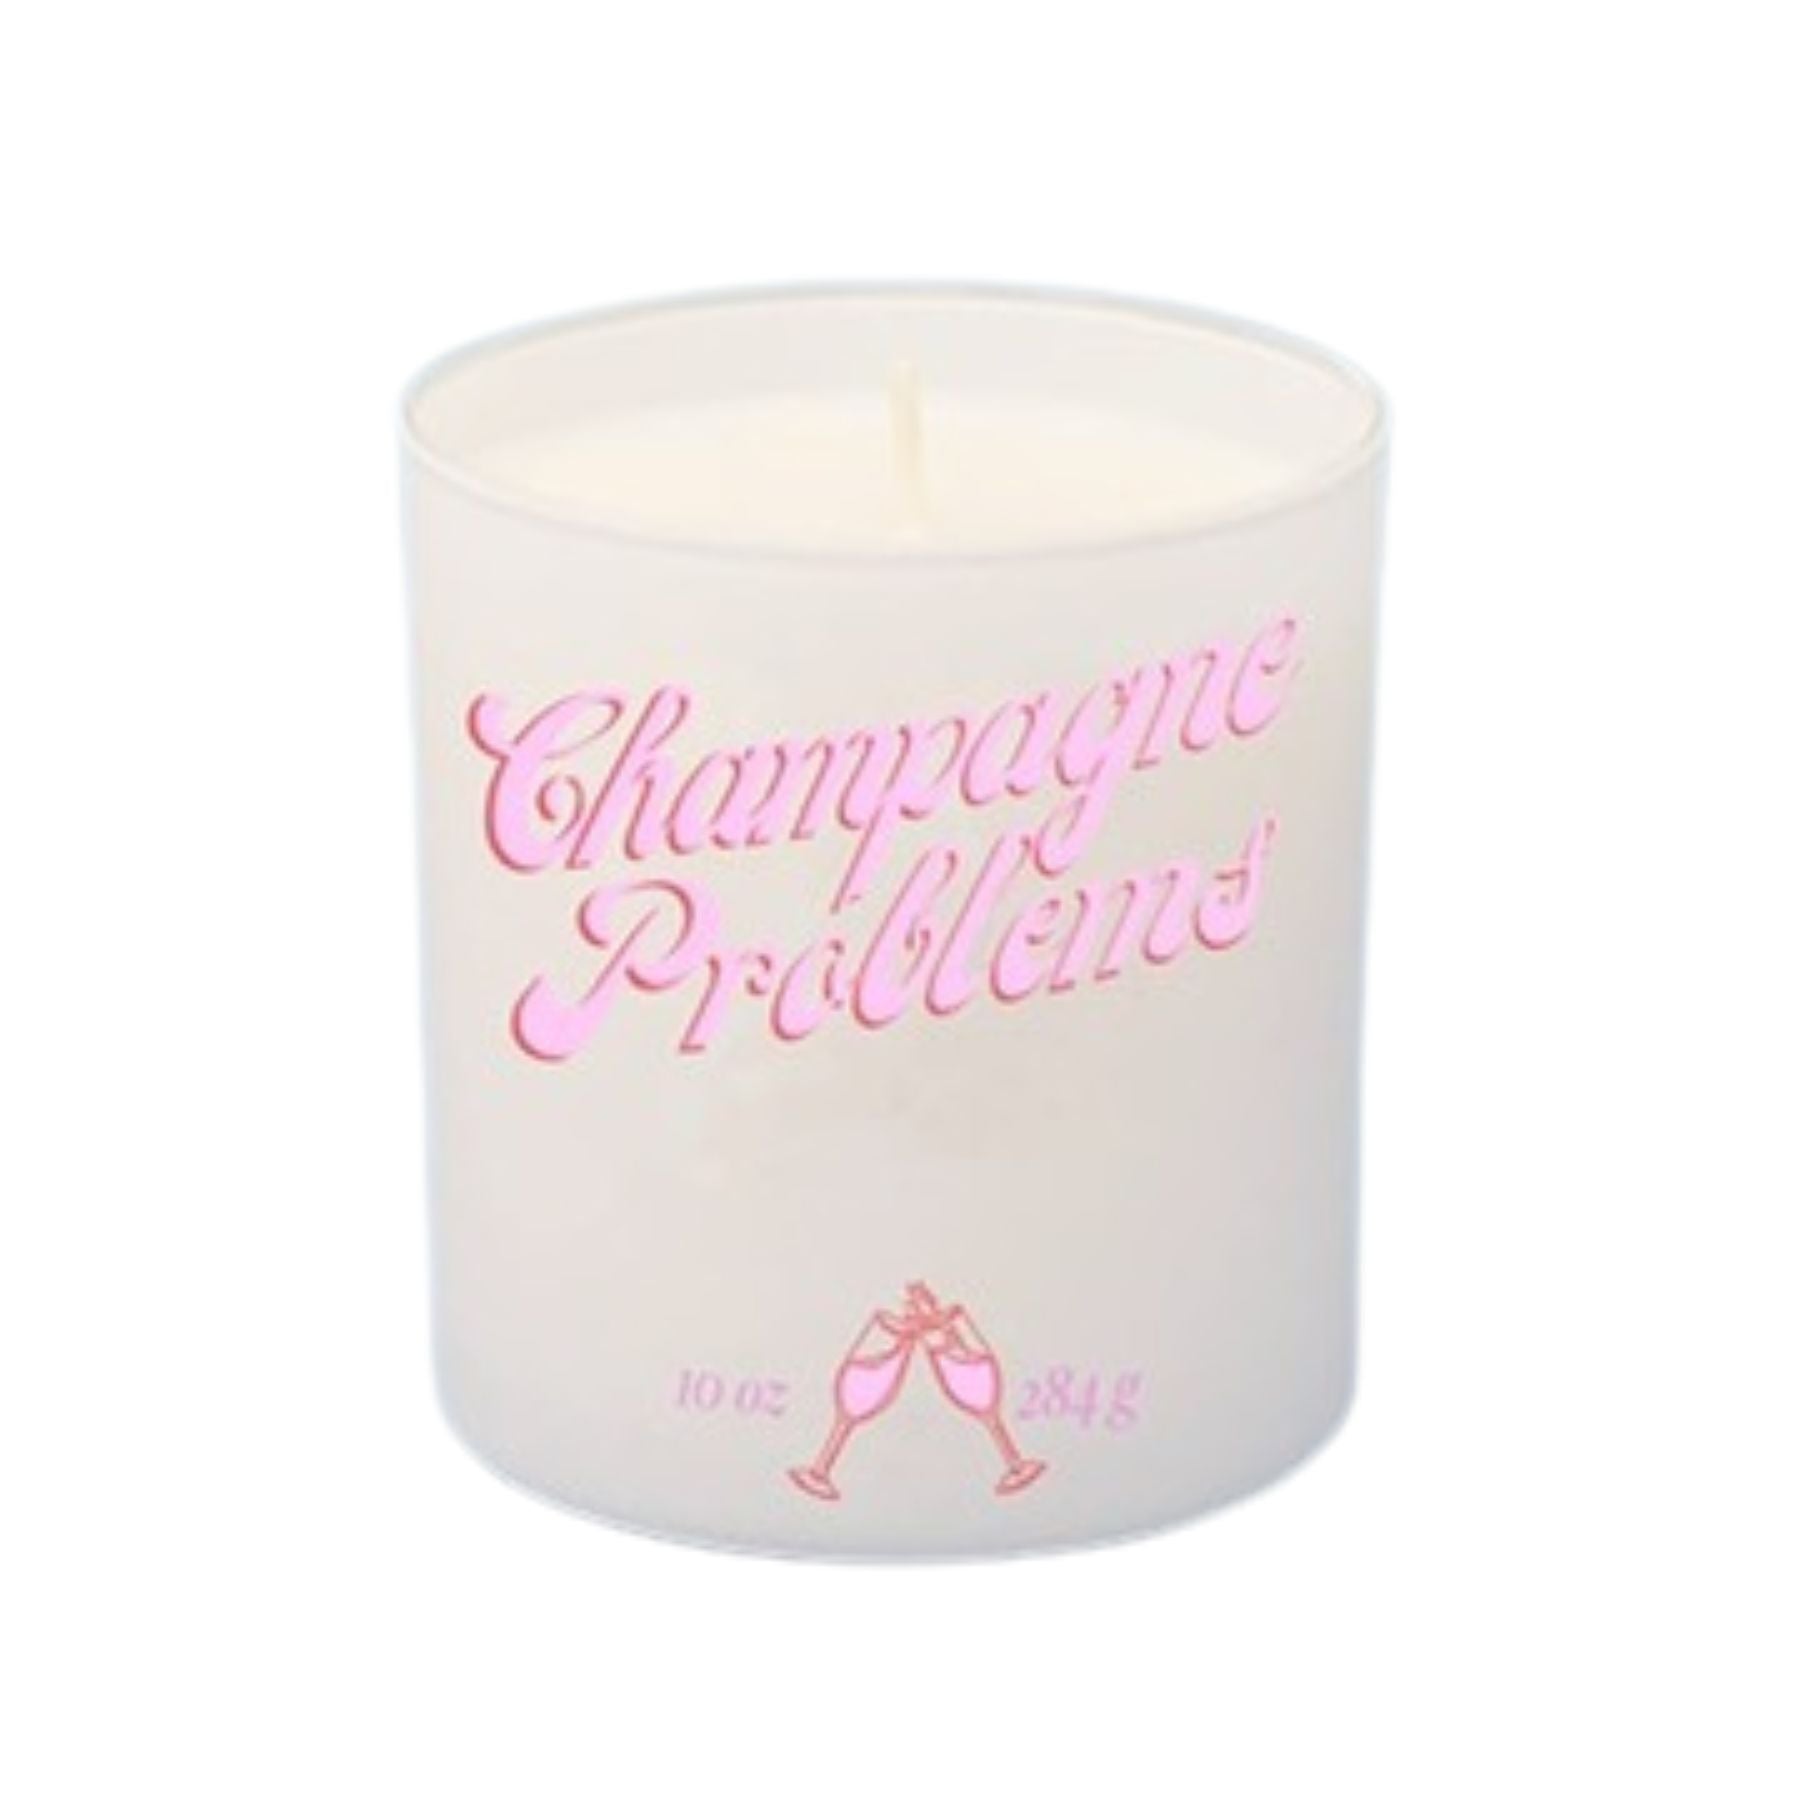 Champagne Problems Scented Candle